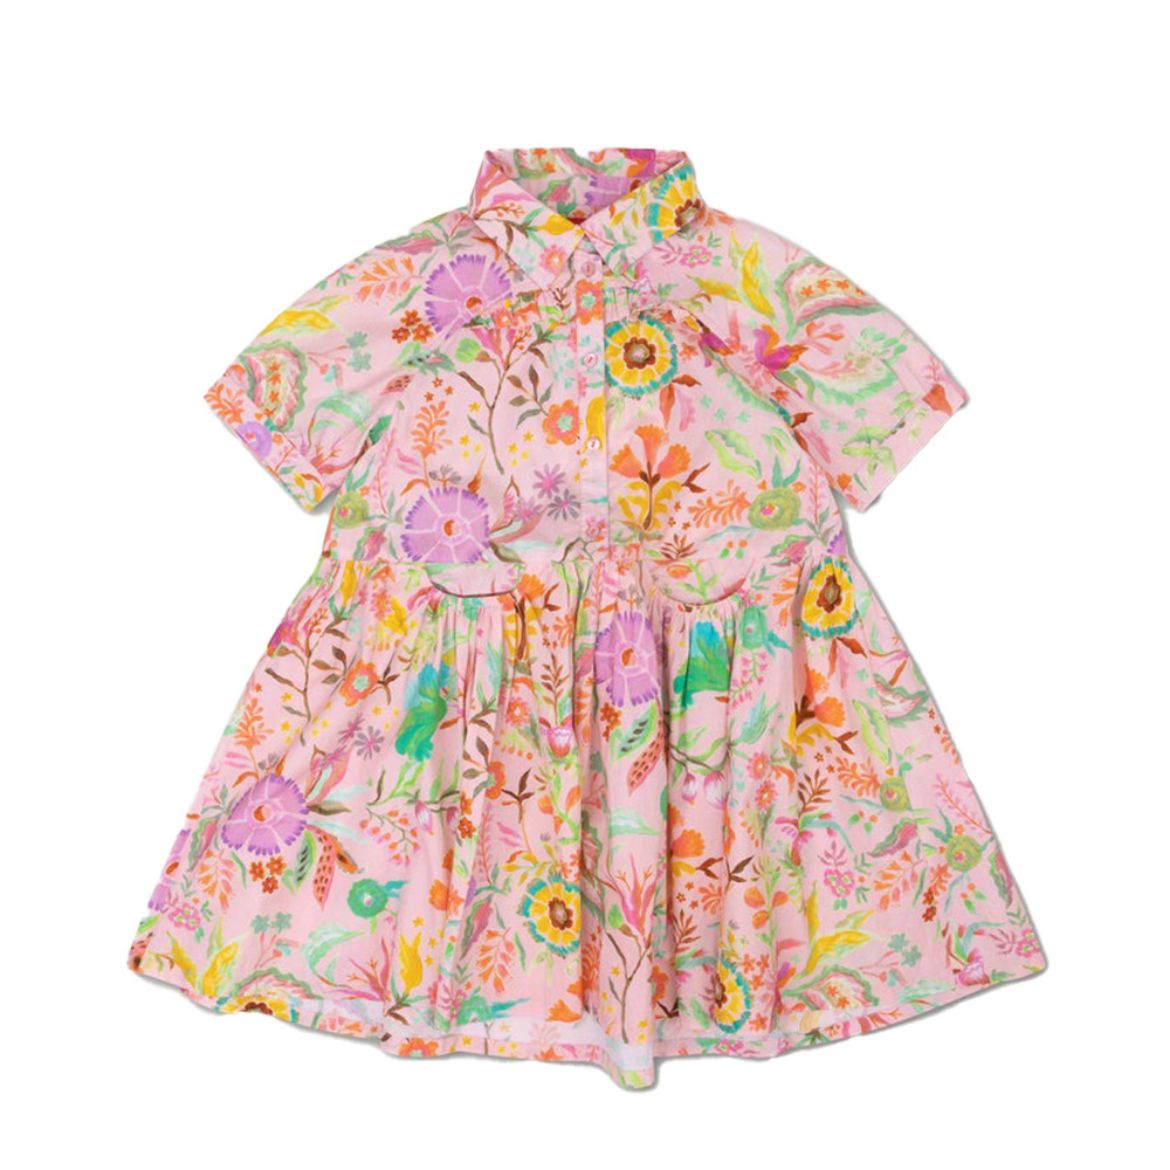 Picture of Oilily Girls Djulie Pink Printed Dress